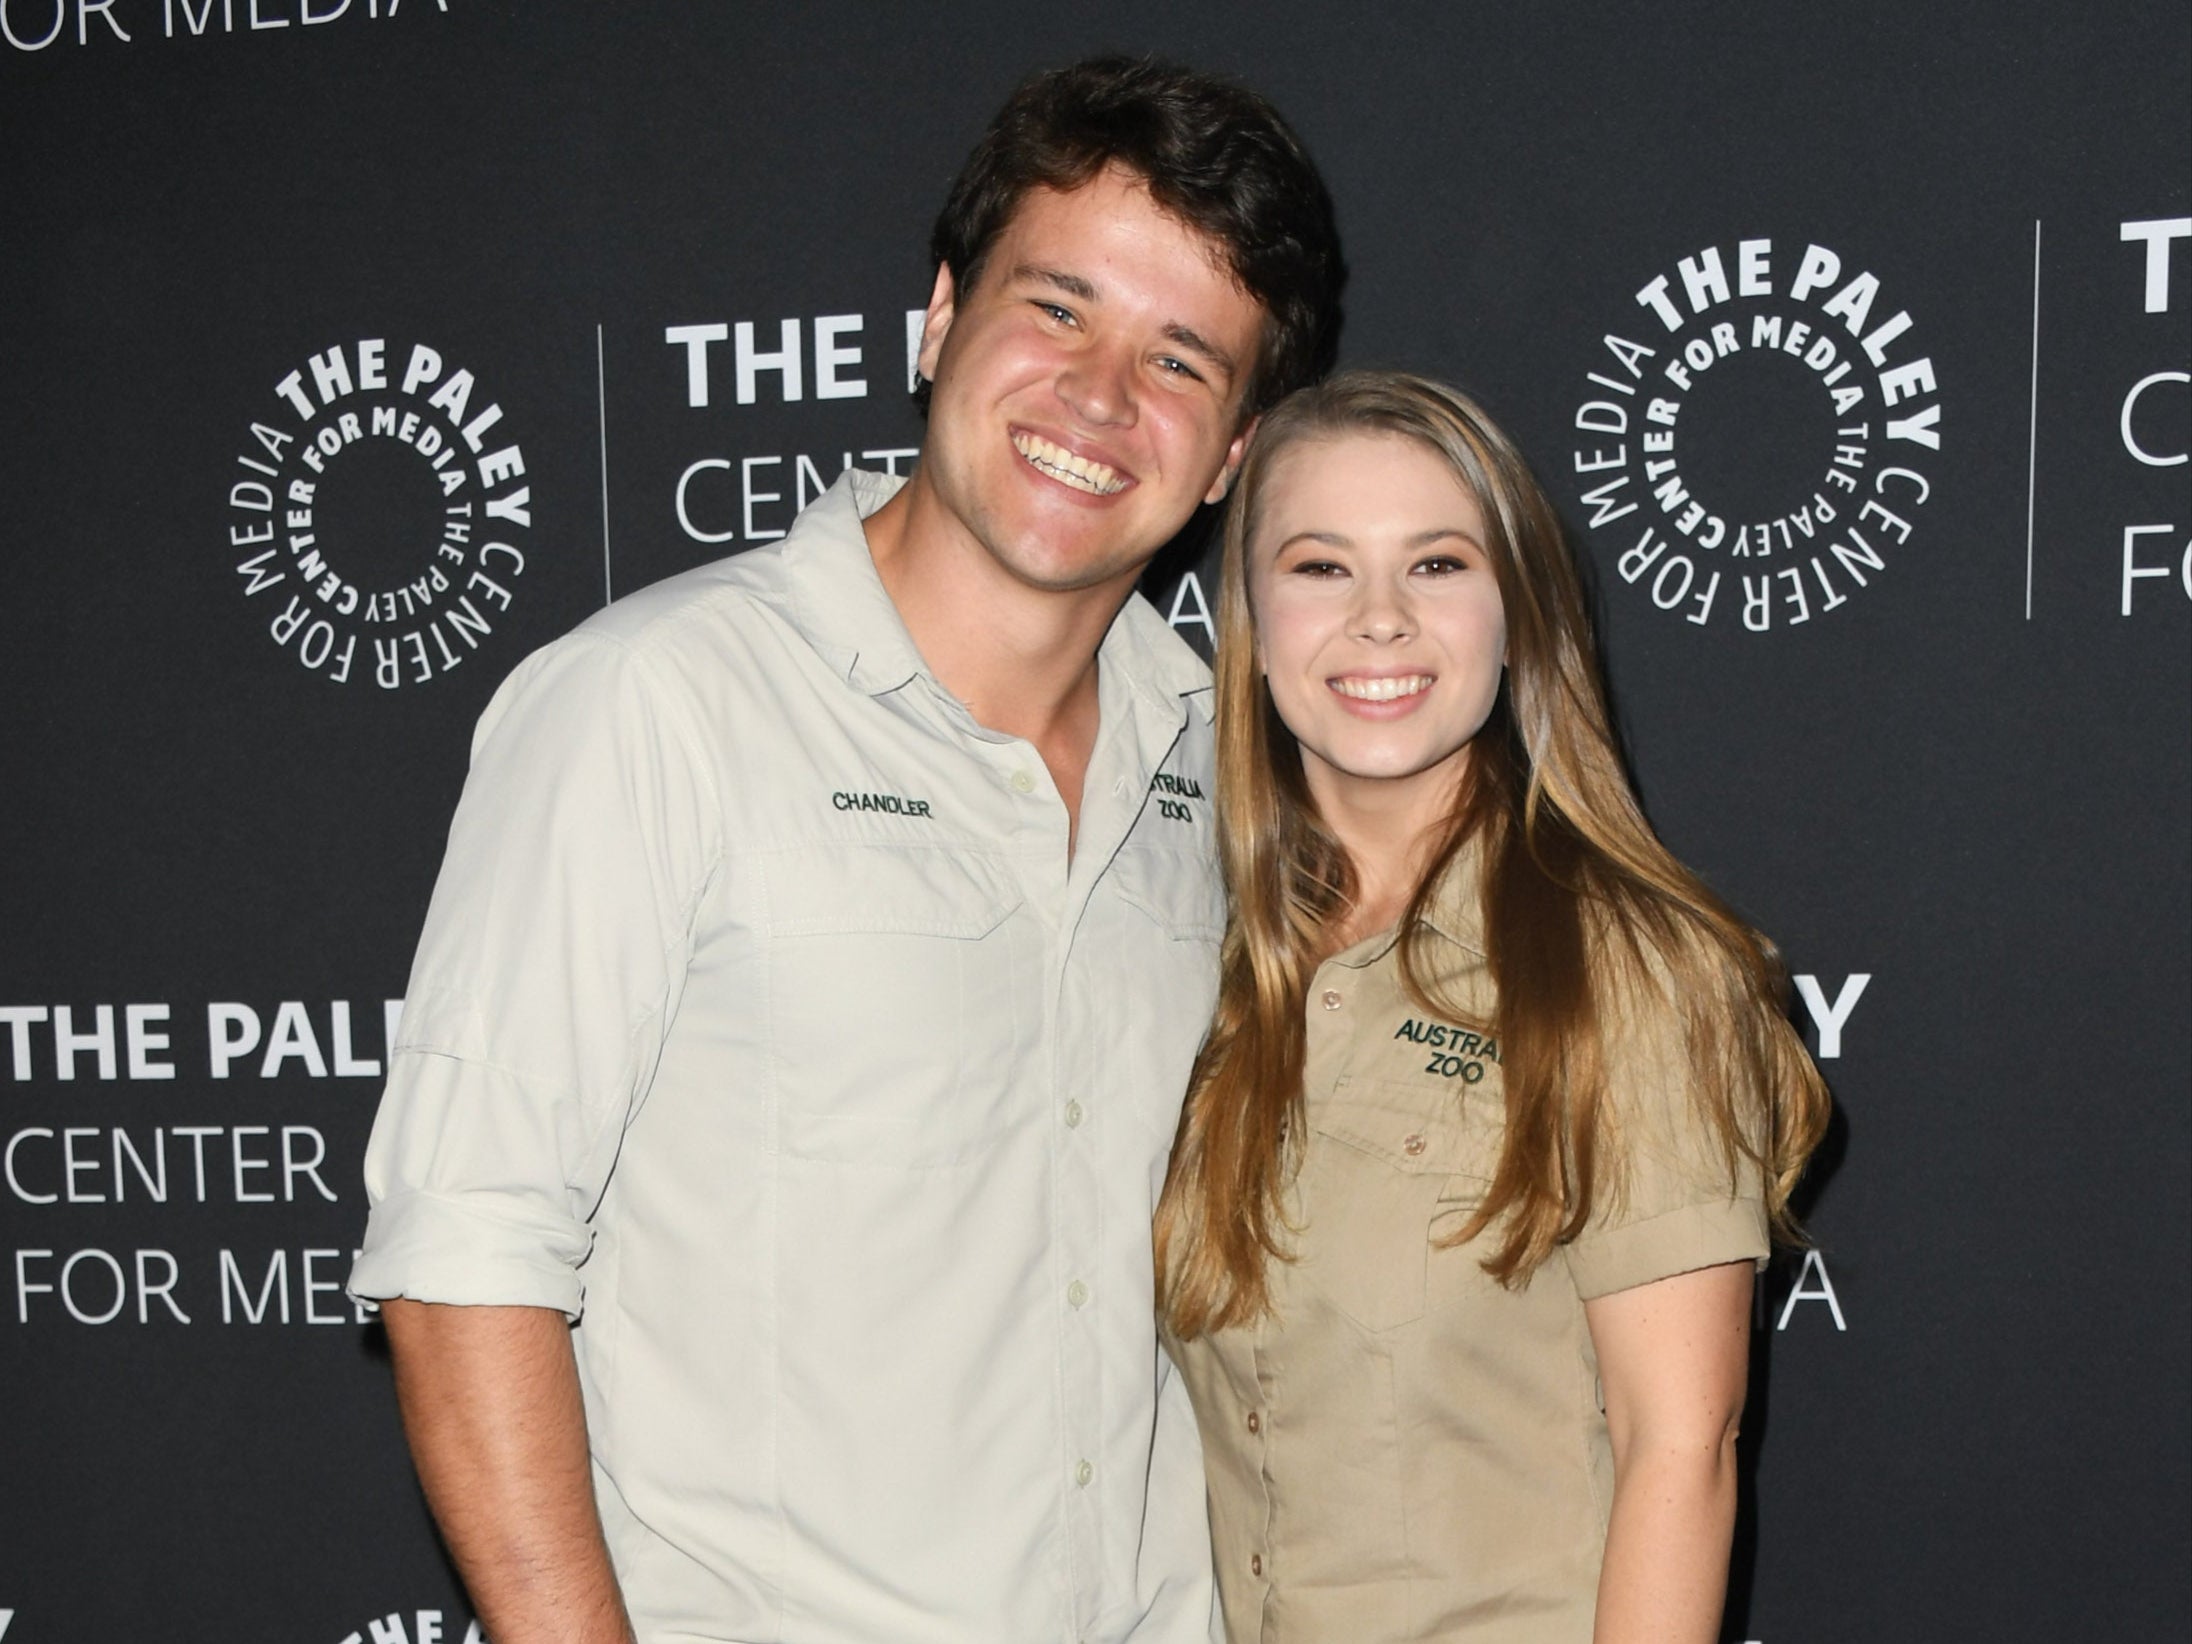 Bindi Irwin and Chandler Powell announce they are having a baby girl